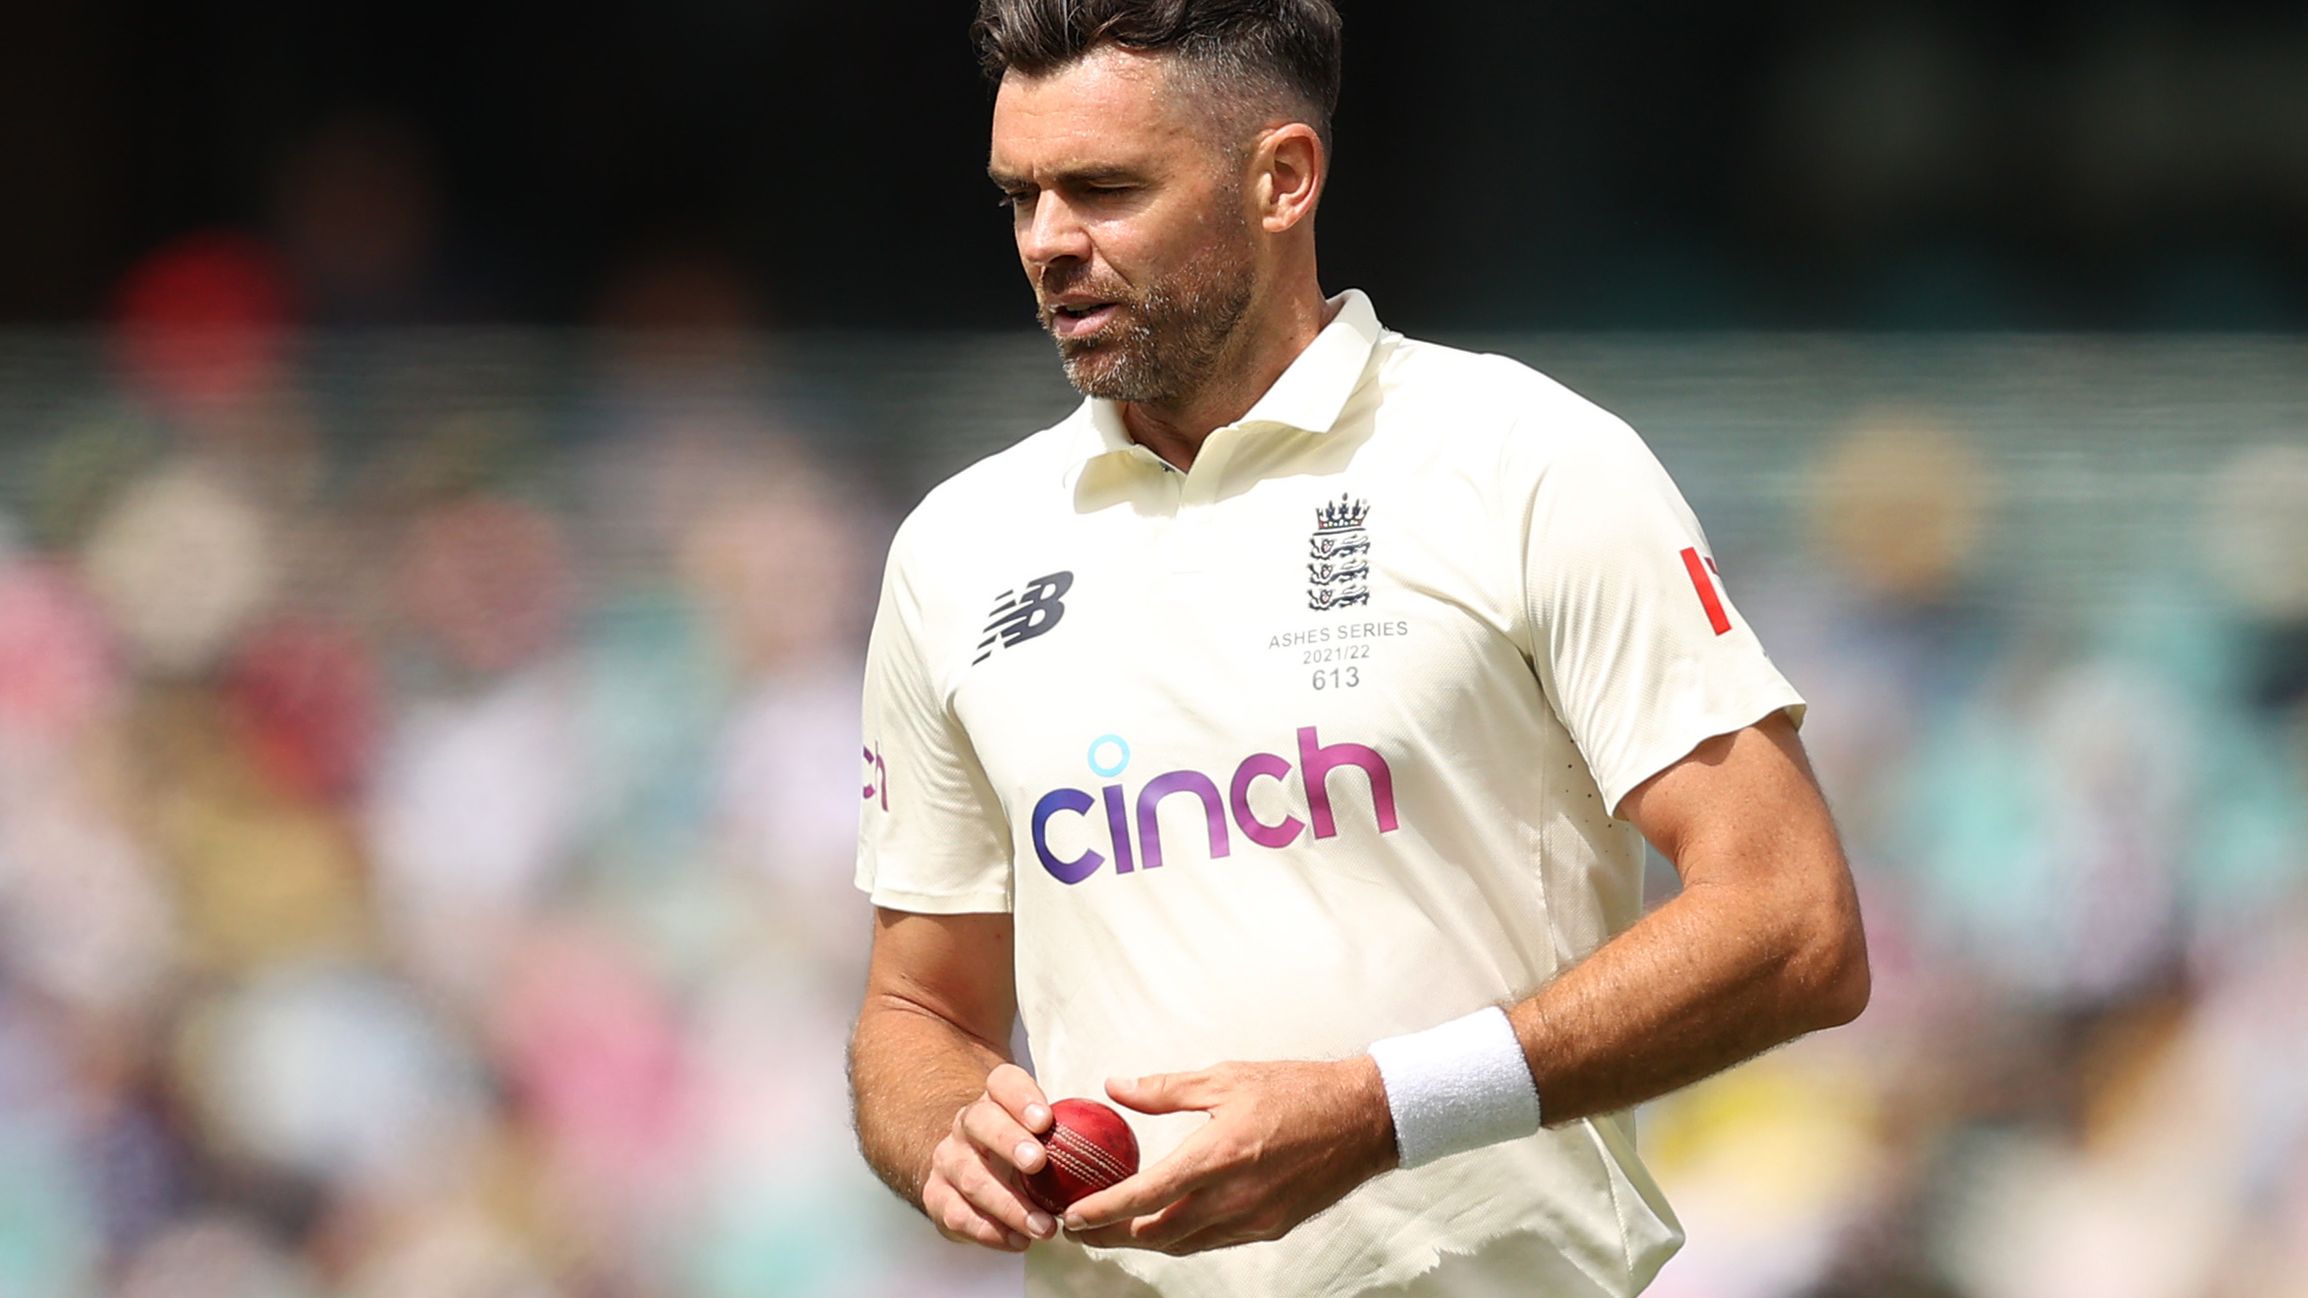 Jimmy Anderson responds to Michael Vaughan's calls for England to discard of him after horror series